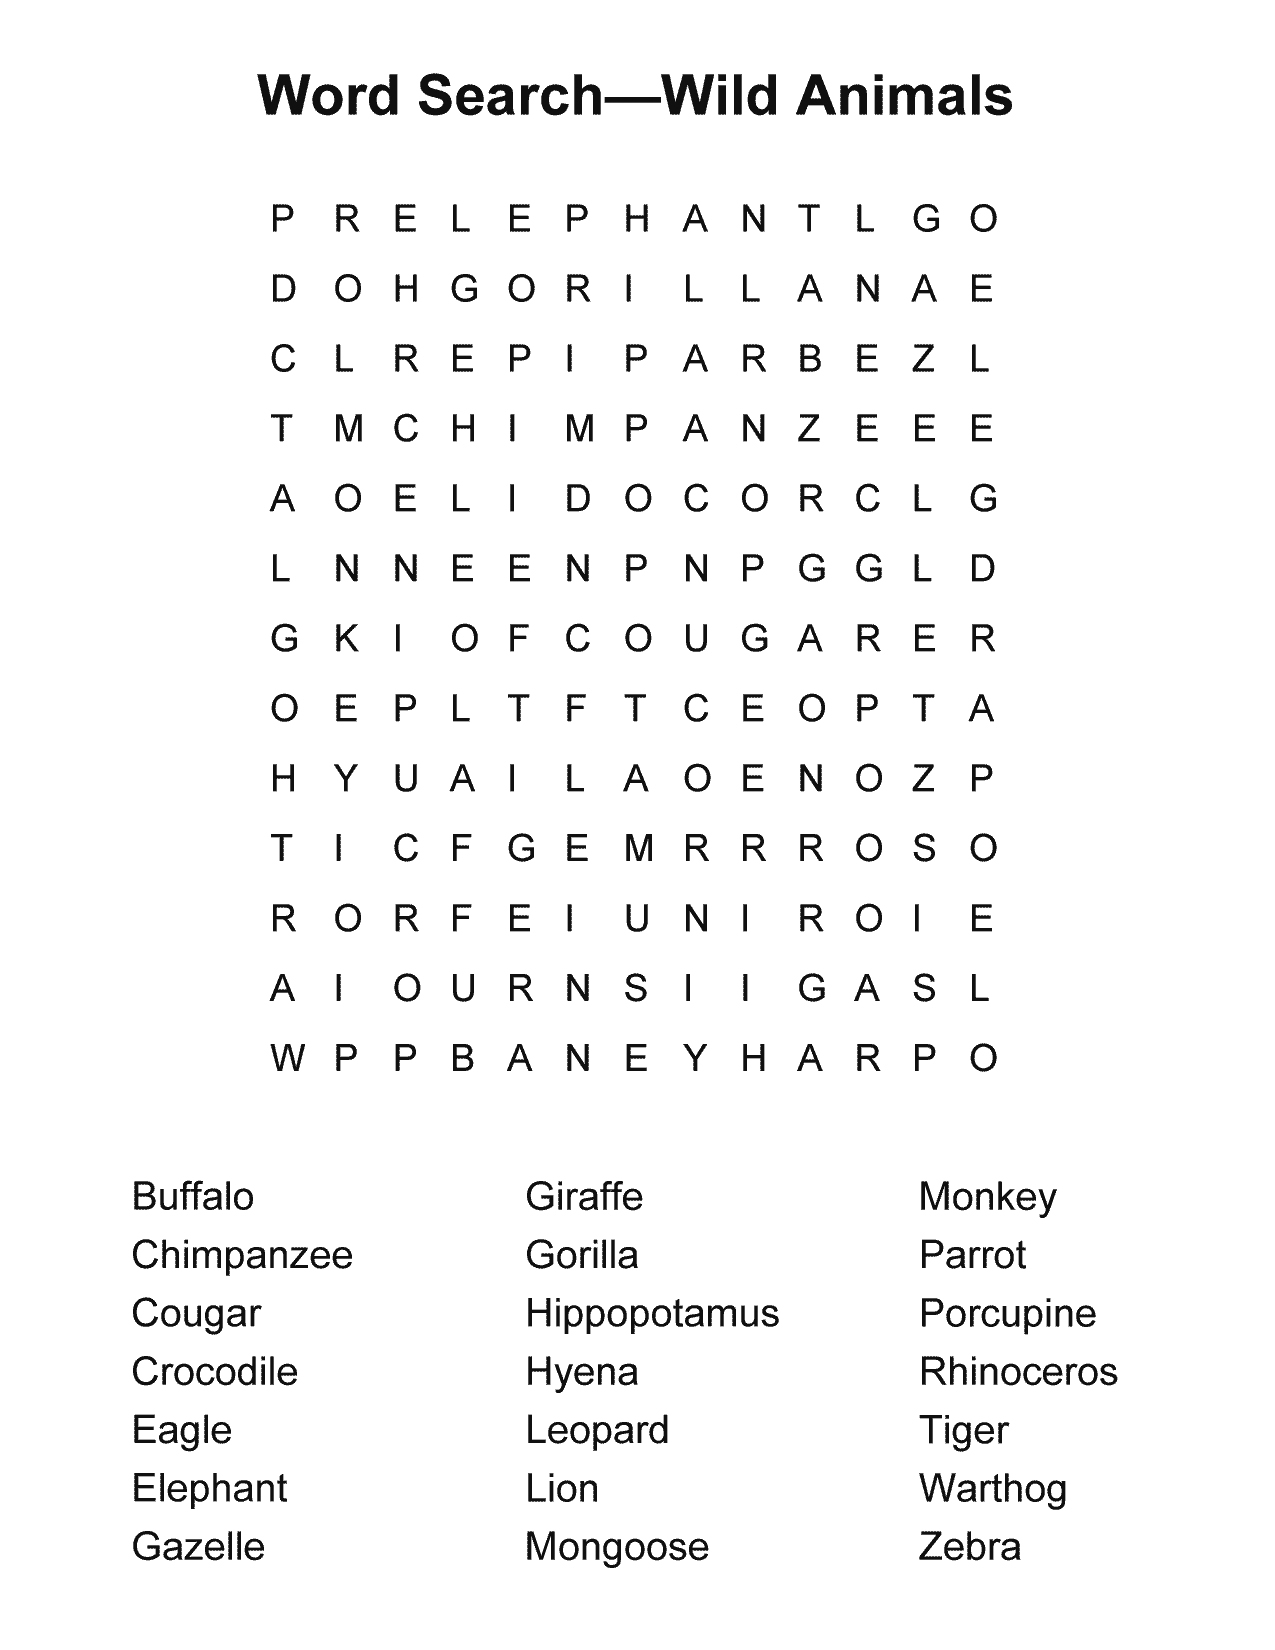 Word search, coloring pages, games for kids, relating to dental care